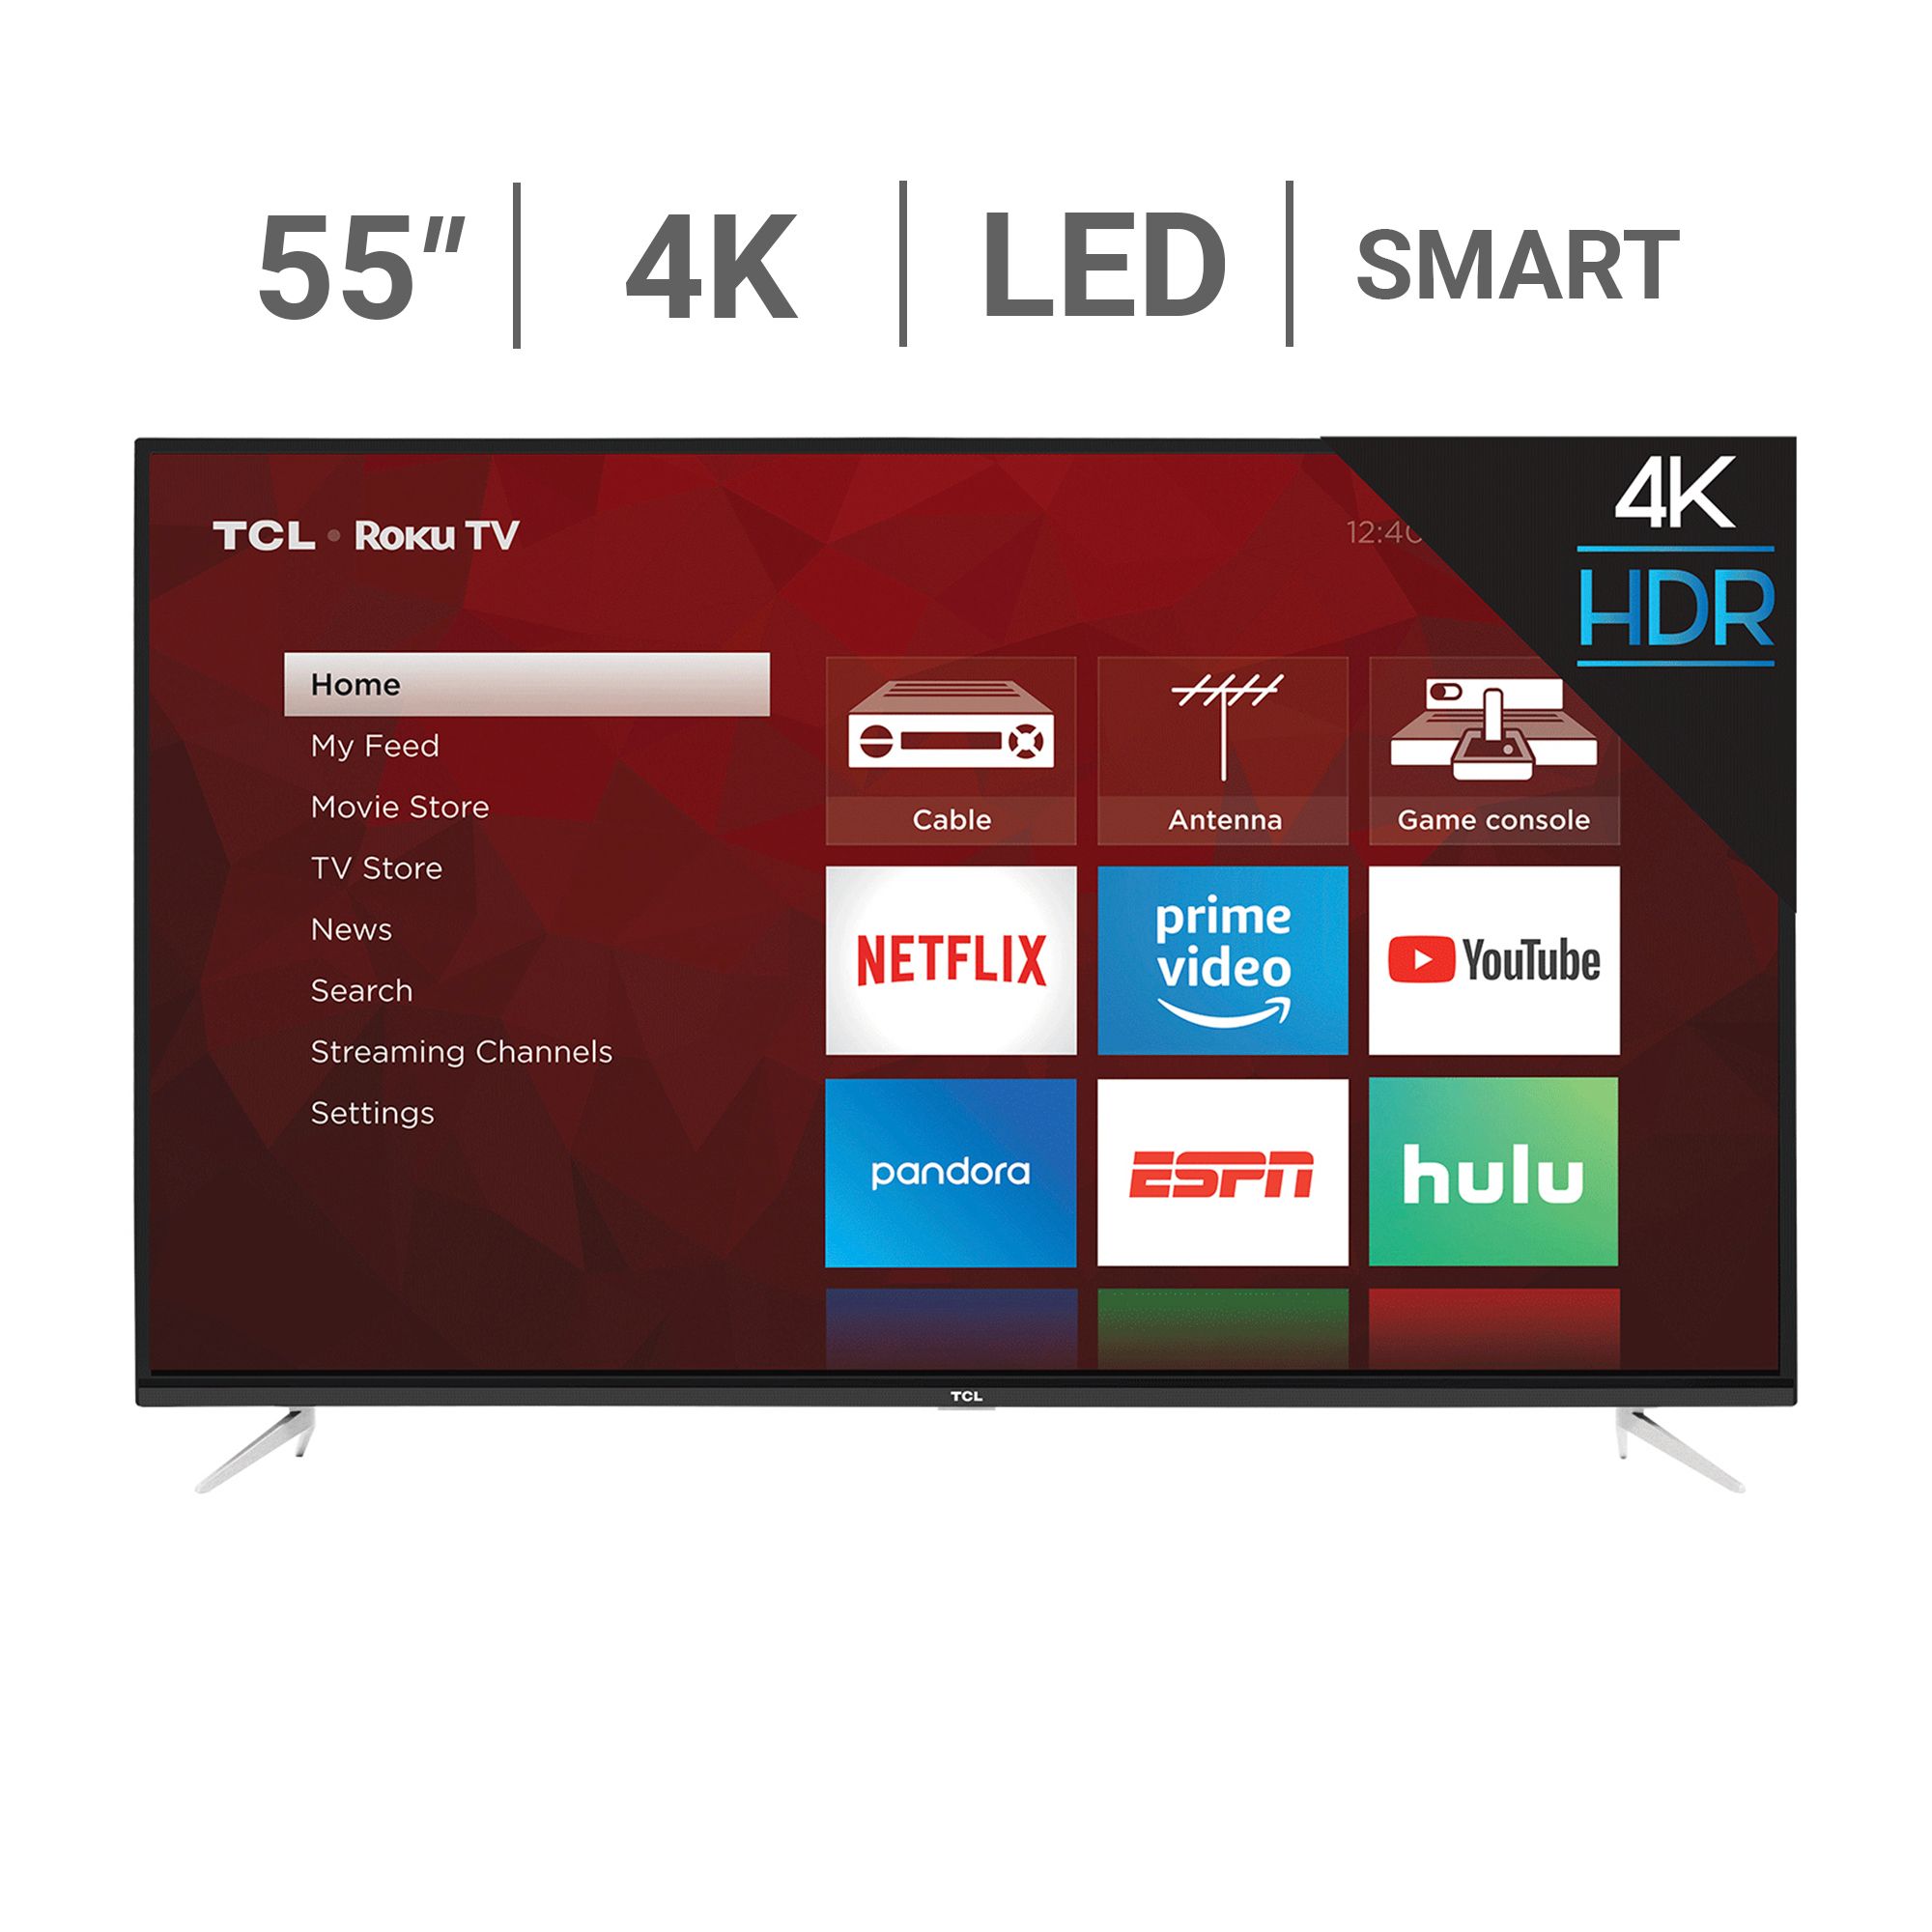 TCL 55" 4 Series HDR 4K UHD Smart TV - 55S423 $279.99 Free Shipping Bjs.com and In Store Pickup